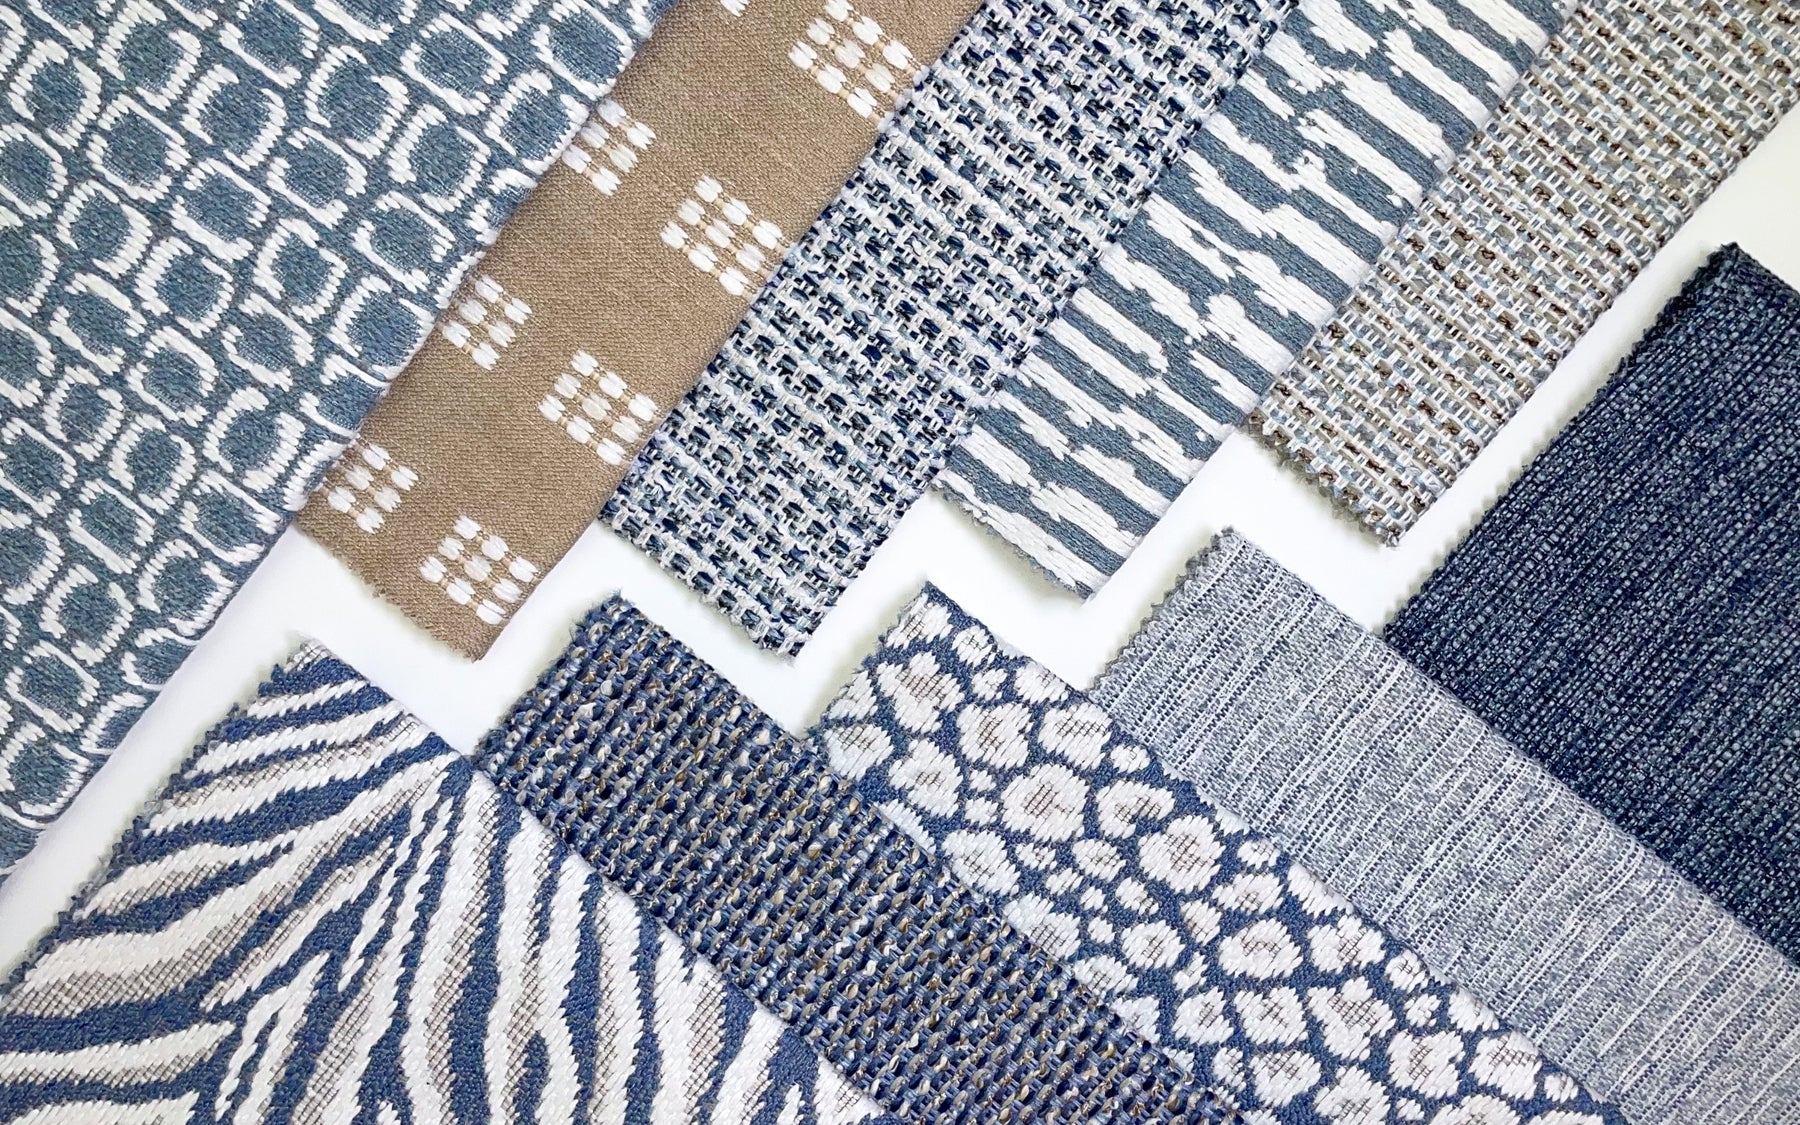 Blue Upholstery Fabrics: The Timeless Allure of Blue in Interior Design